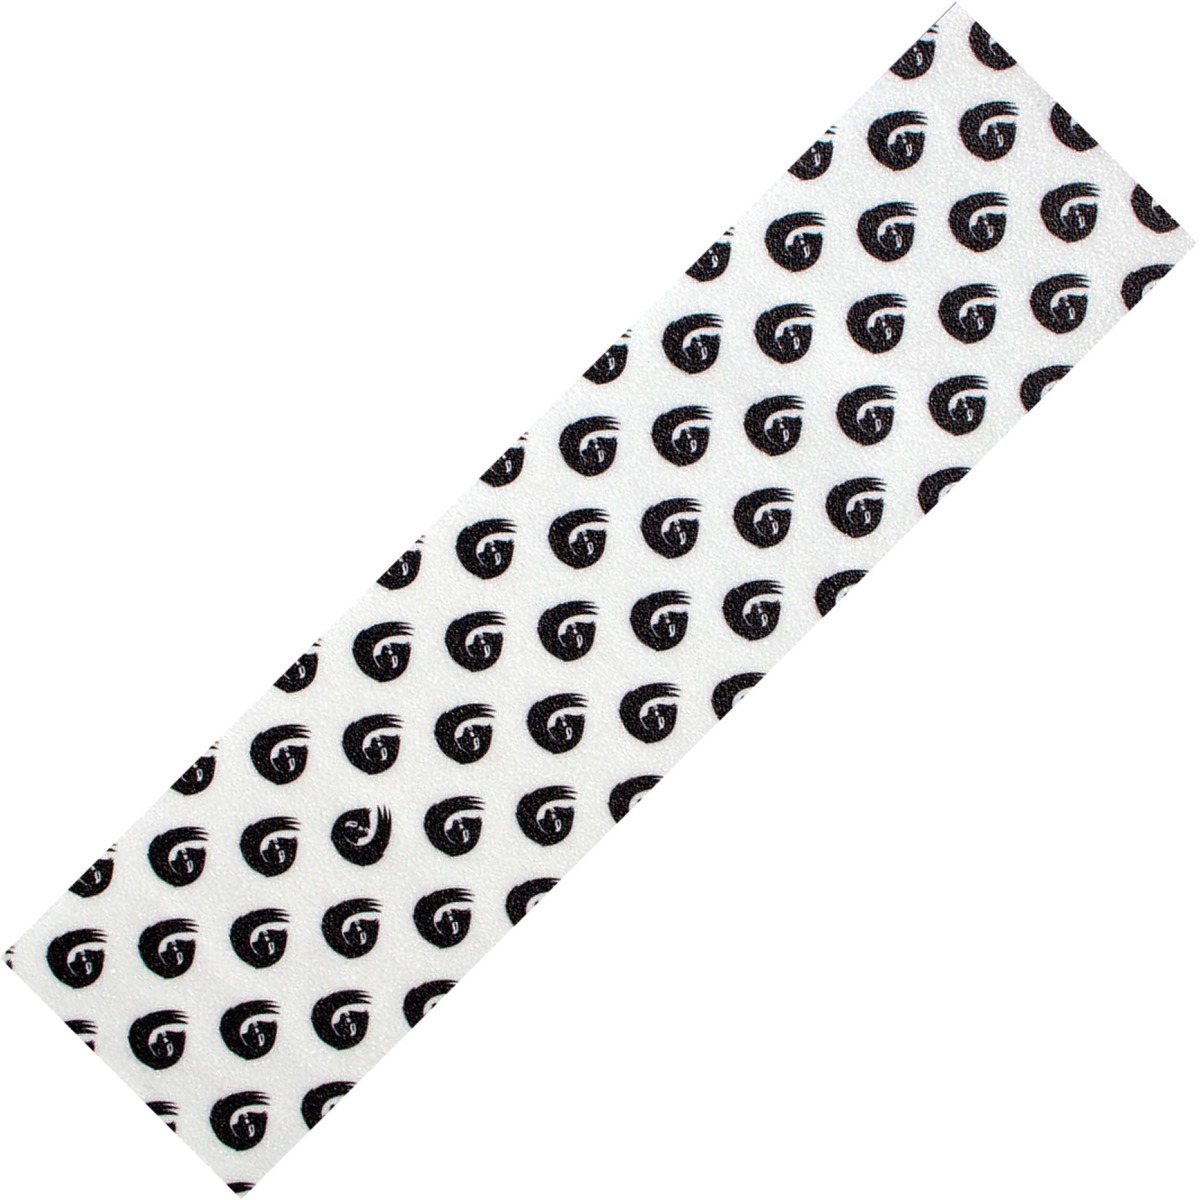 An image of Hella Grip Sloth Dot White / Black Scooter Griptape - 24” x 6”